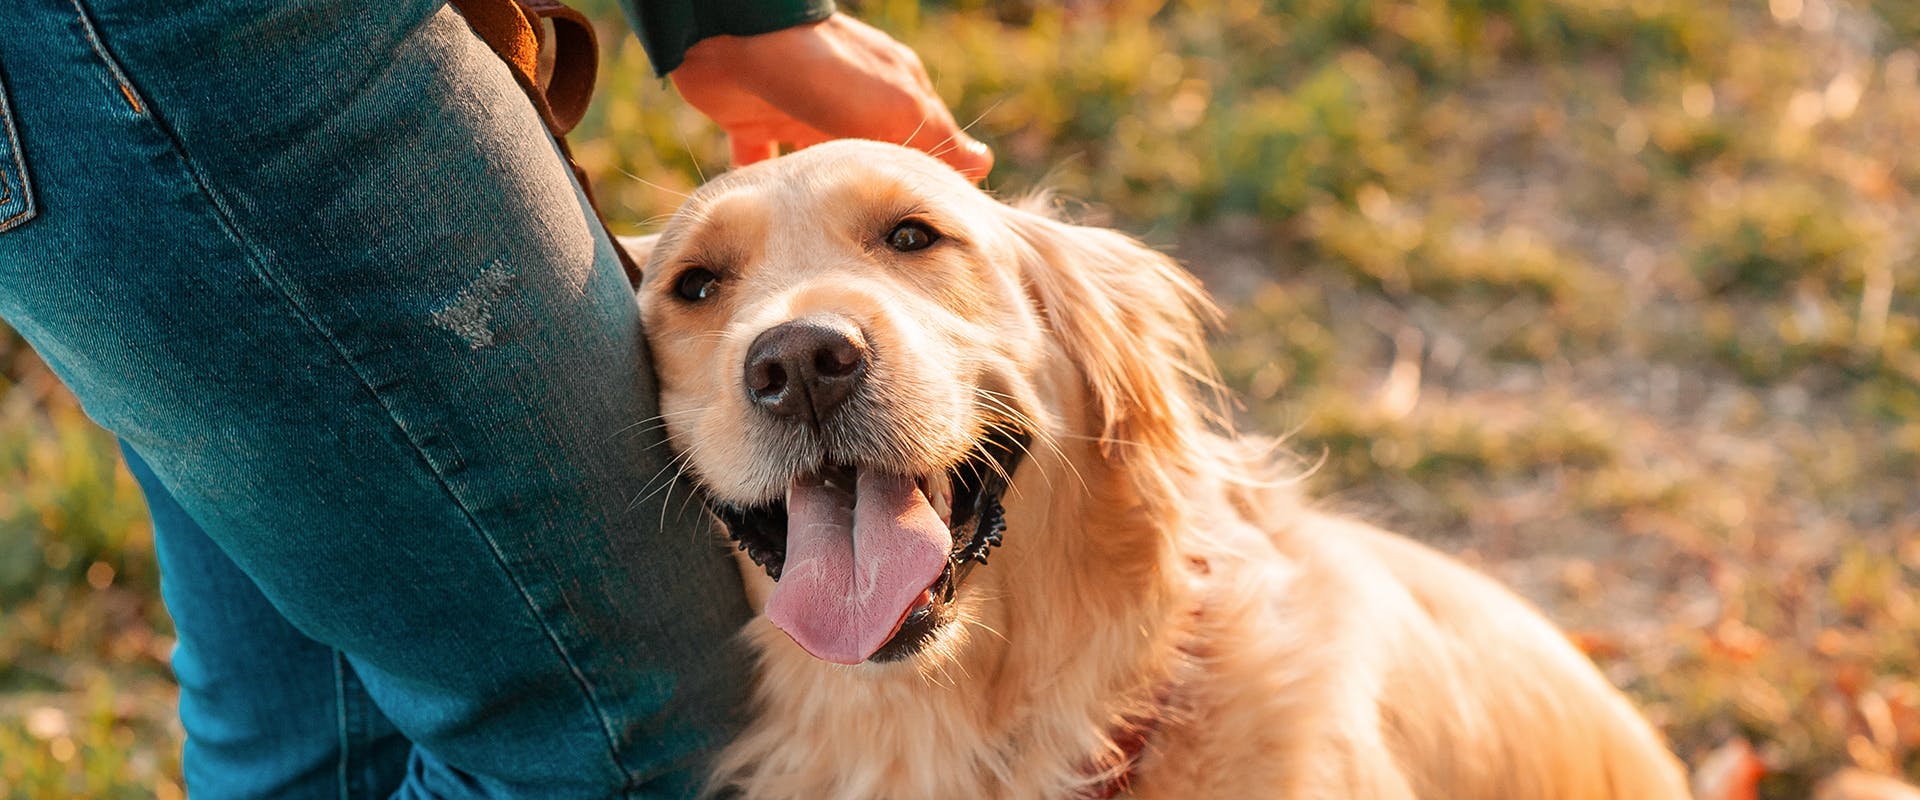 A happy Golden Retriever resting its head on a person's leg